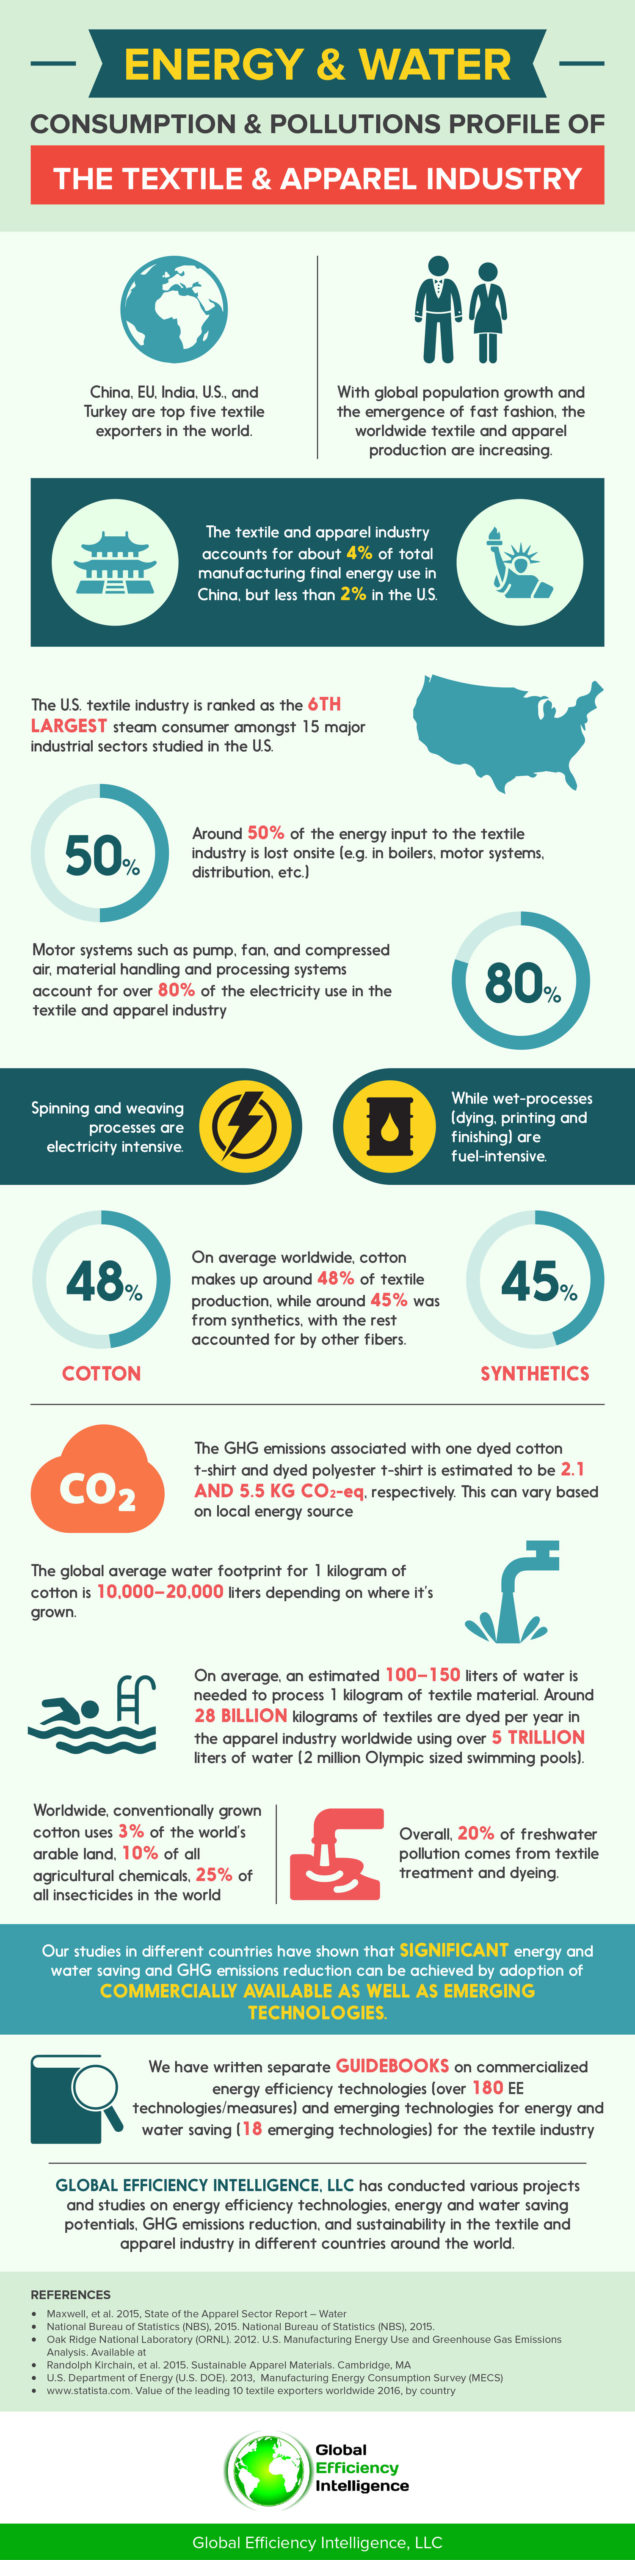 Infographic: Energy and Water Consumption and Pollutions Profile of the Textile and Clothing Industry